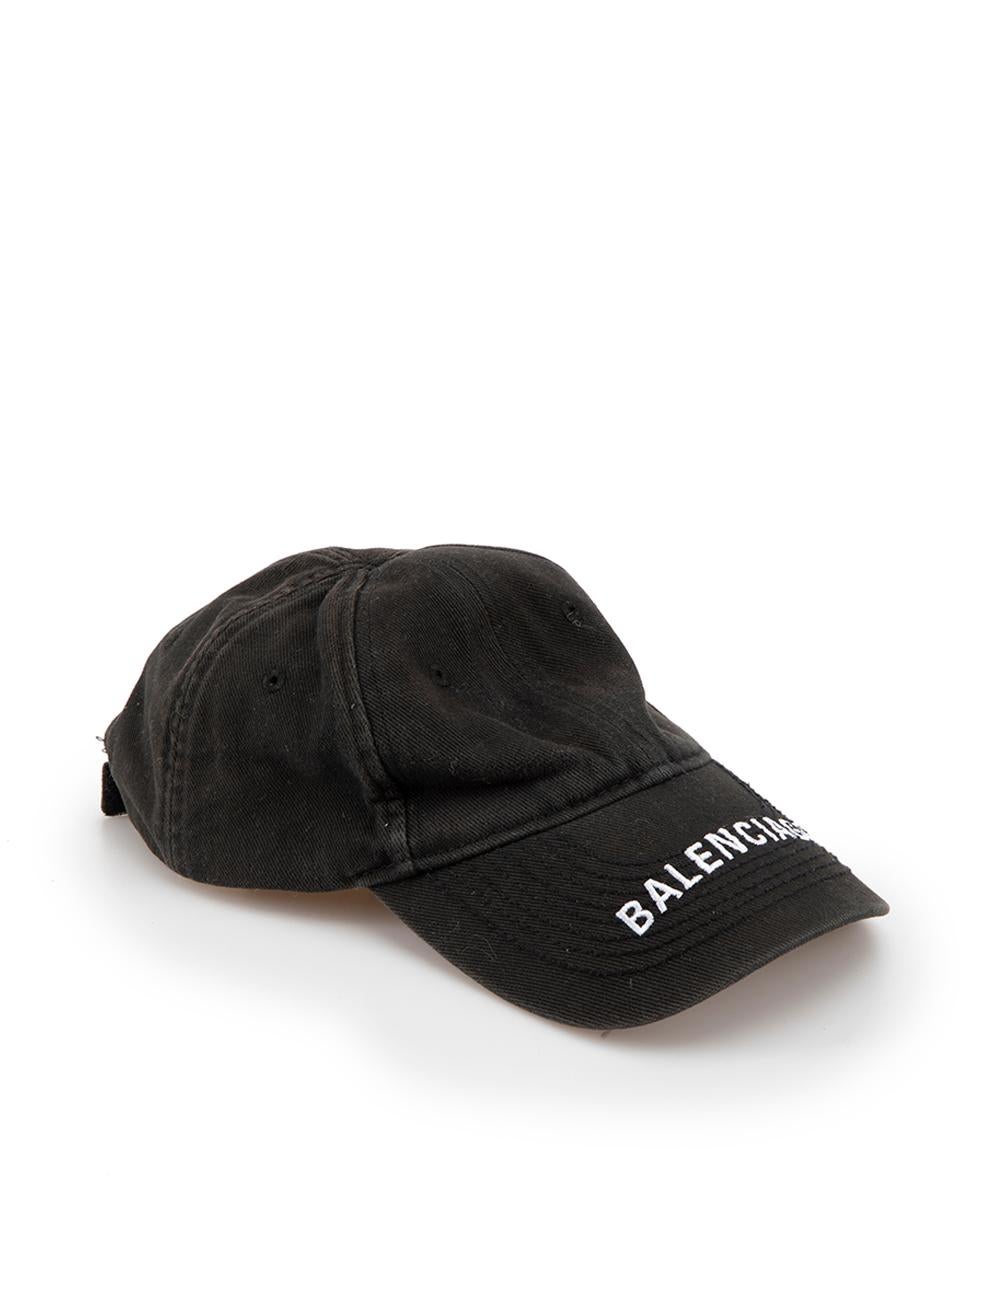 CONDITION is Good. Minor wear to cap is evident. Light wear to fabric colouring with some loose threads seen at the back strap of this used Balenciaga designer resale item.



Details


Black

Cotton

Baseball cap

White logo embroidery

Back velcro